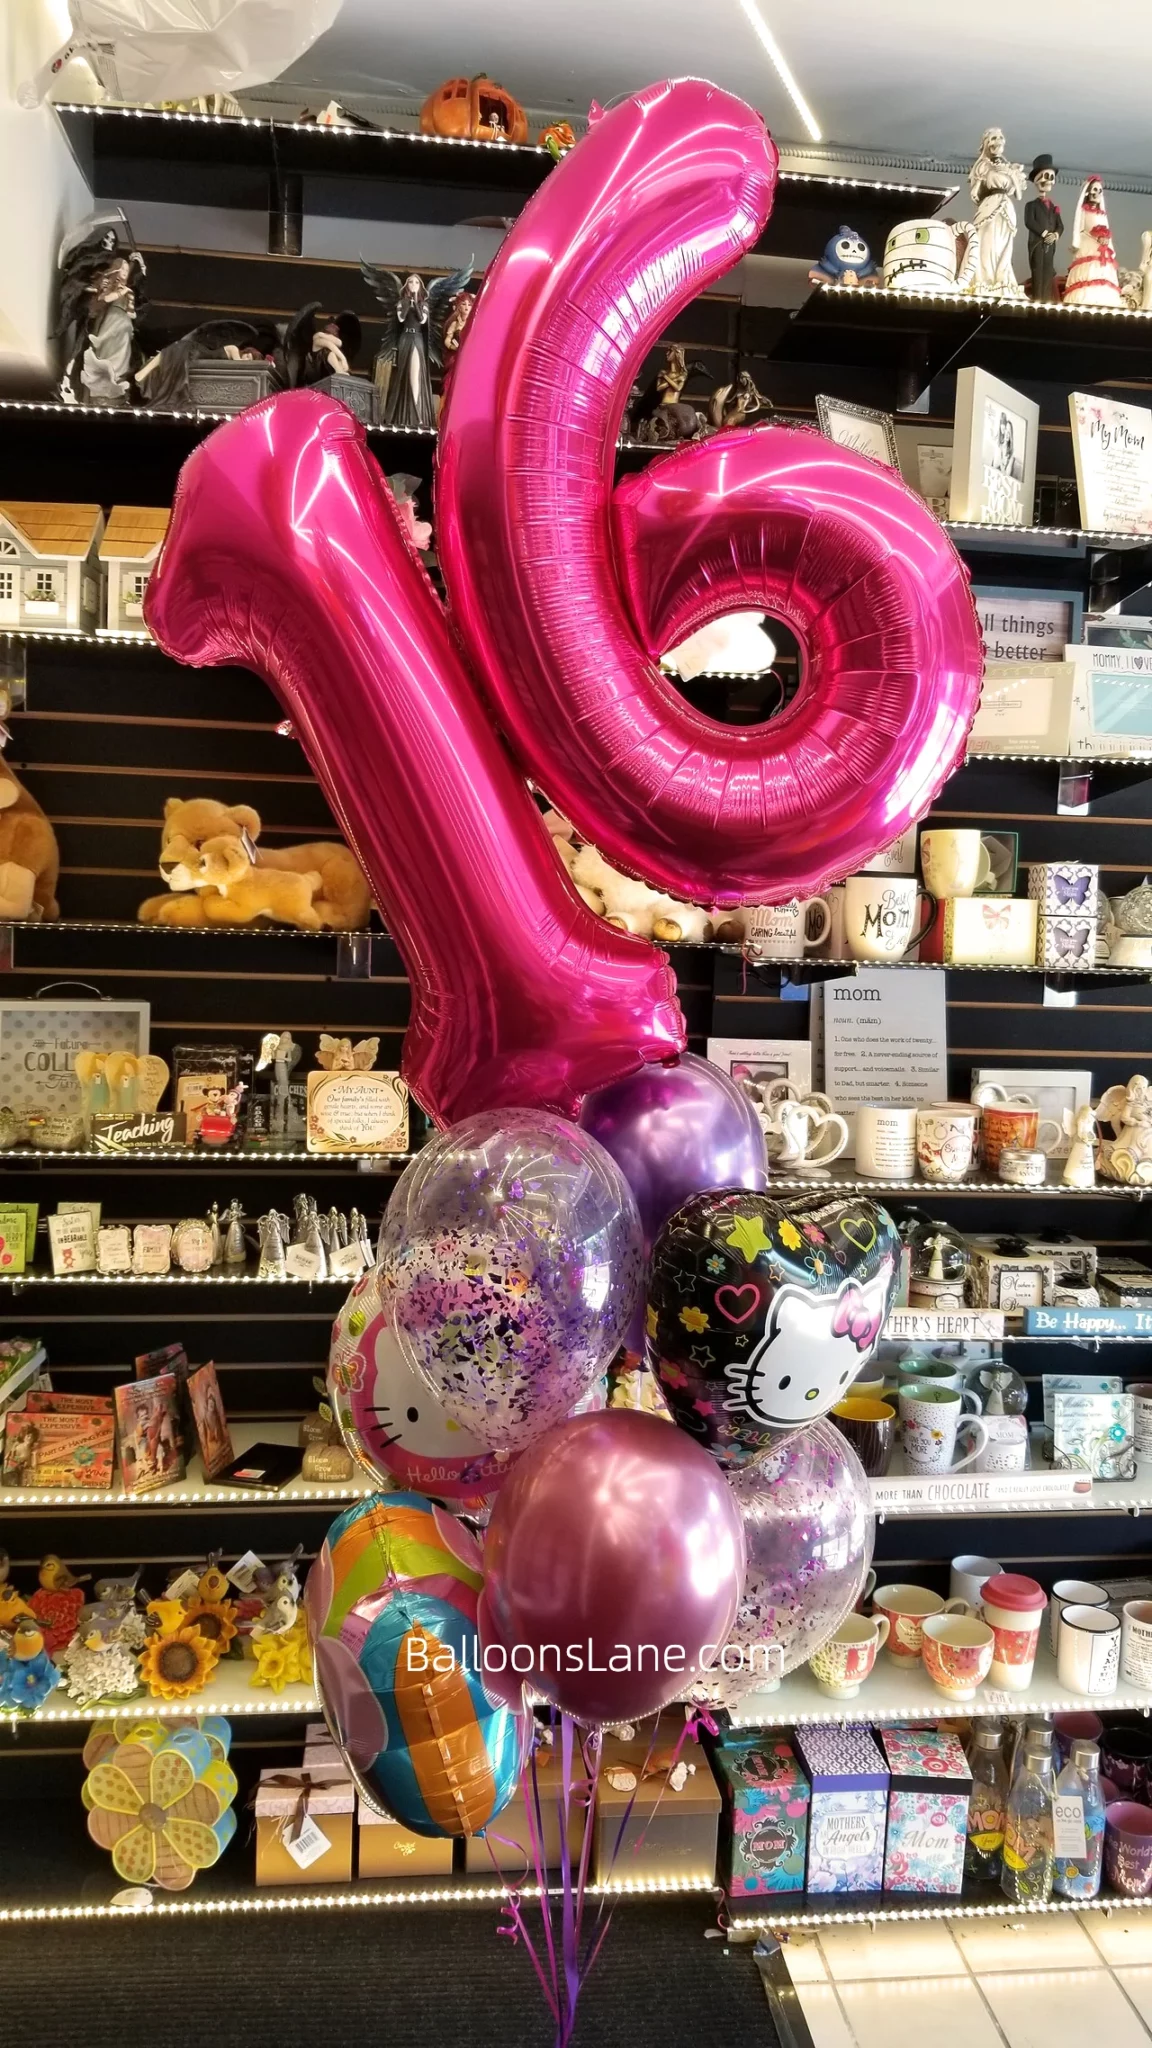 Sweet Sixteen number balloons in blush pink, accompanied by a bouquet featuring pink balloons, silver heart-shaped balloons, character balloons, and pink confetti balloons.